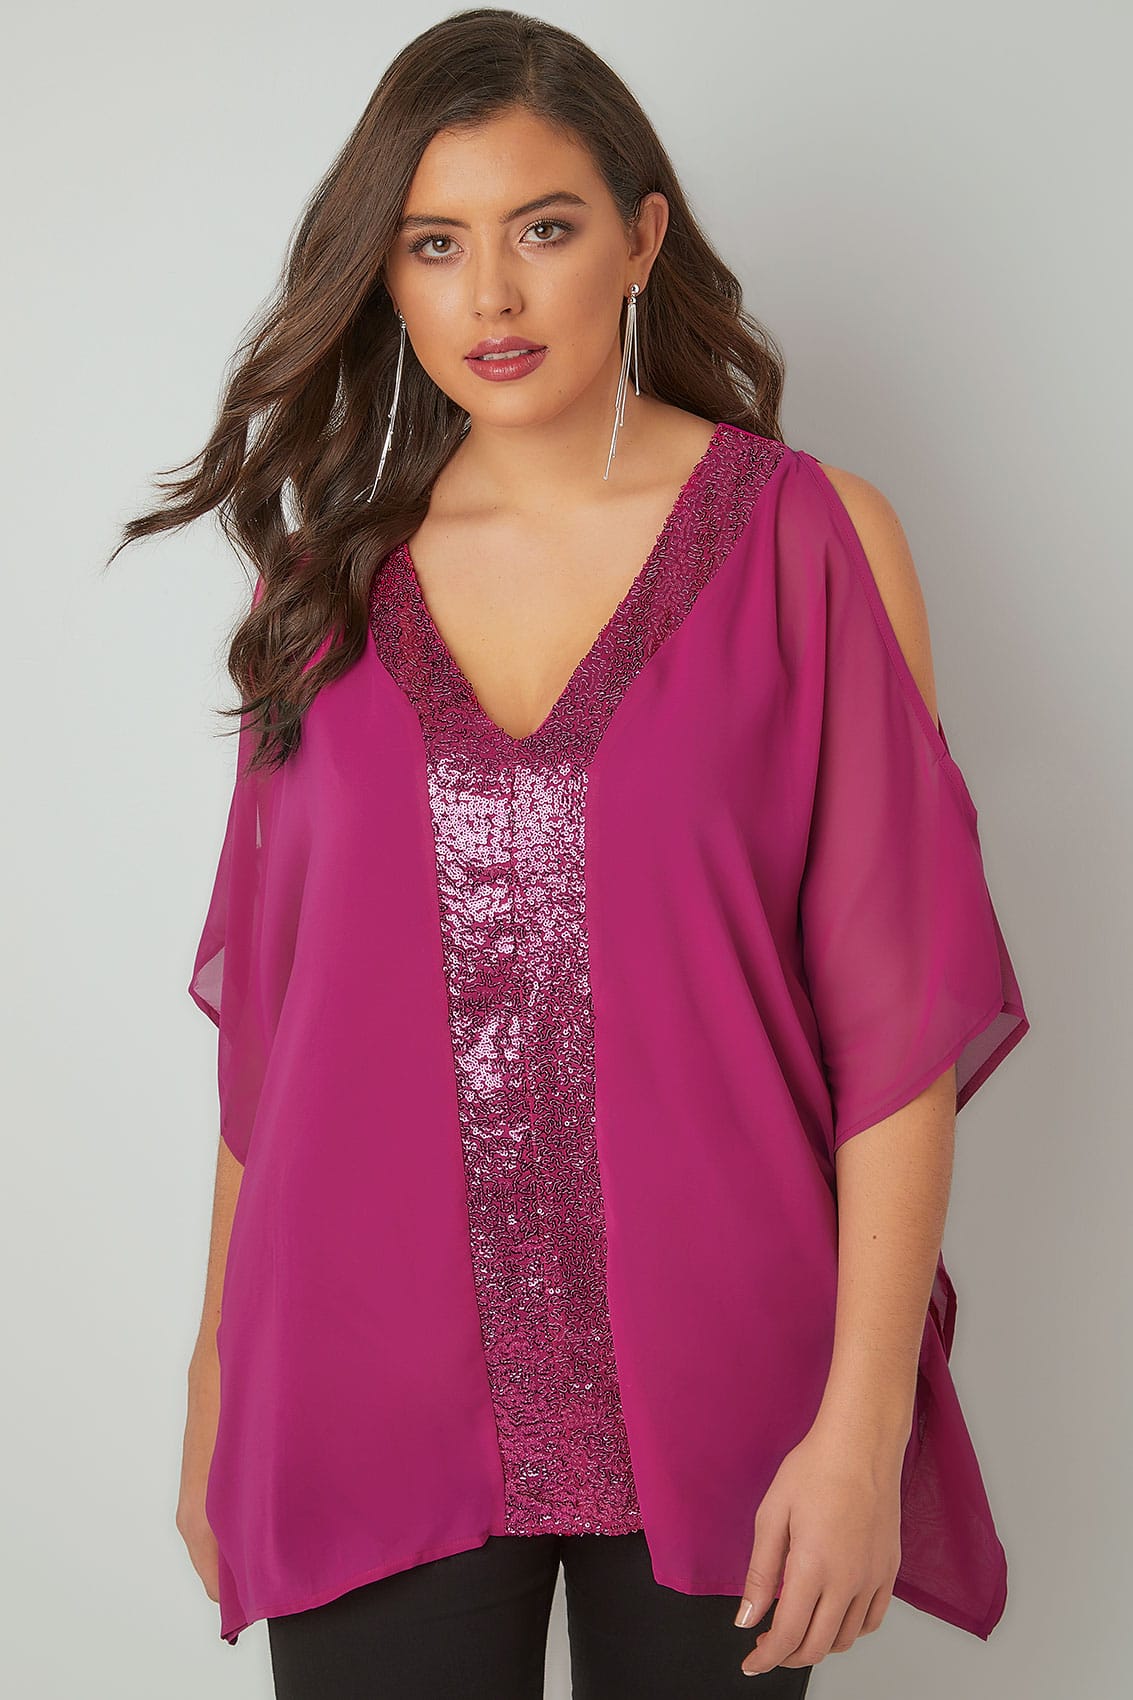 Fuchsia Pink Sequin V-Neck Blouse With Cold Shoulders, Plus size 16 to 32